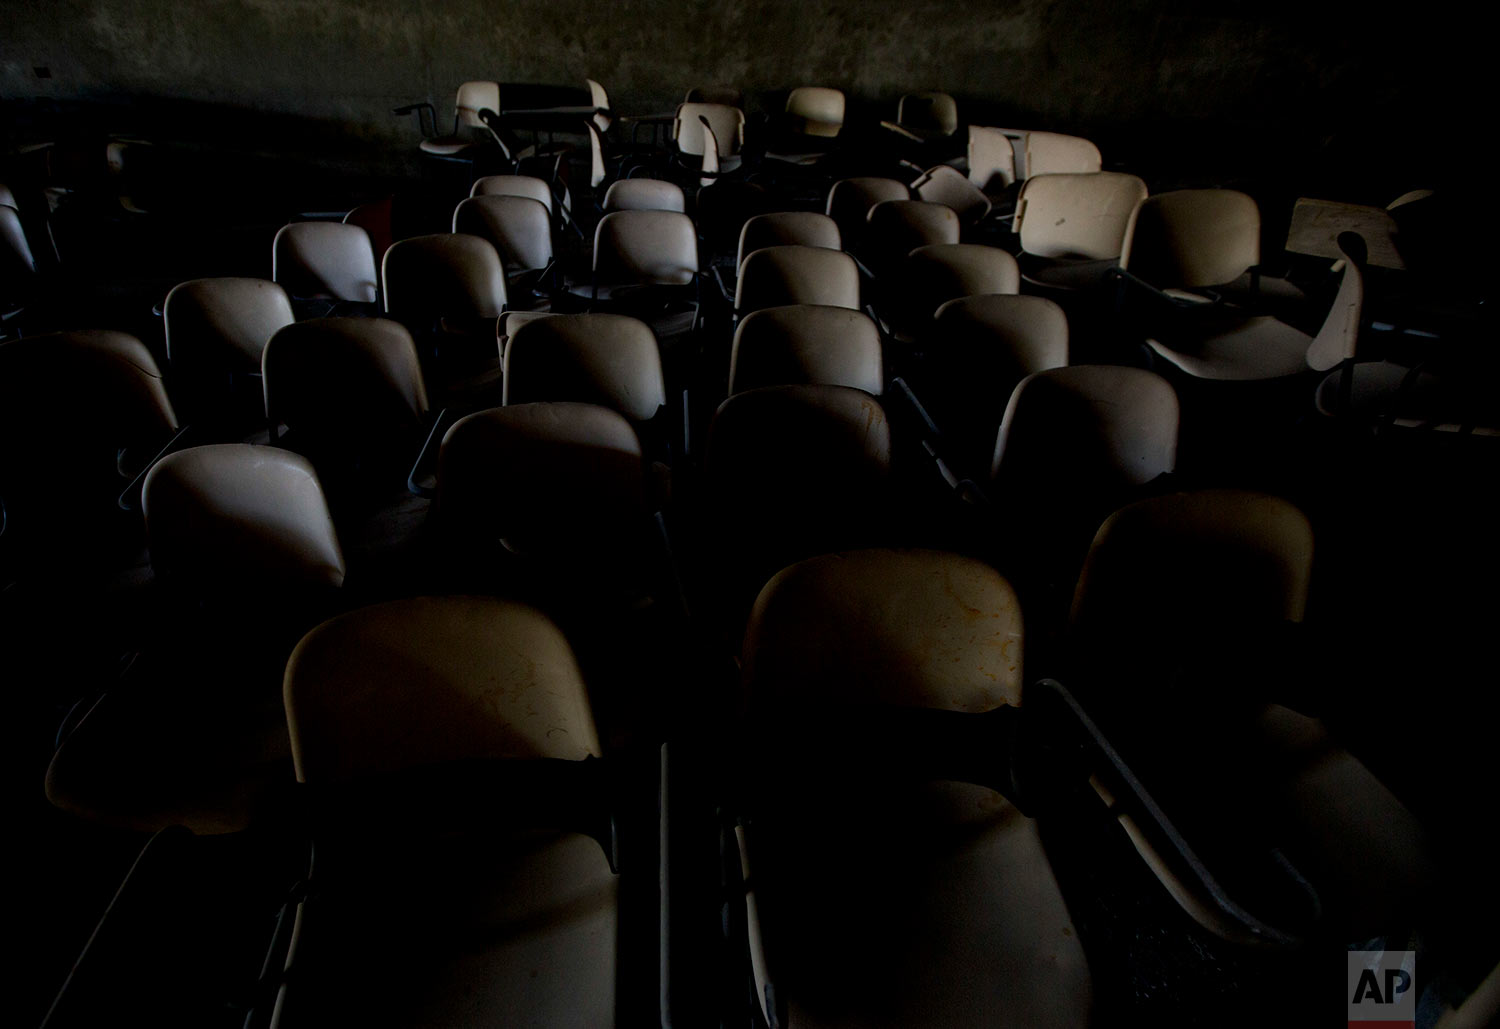  Stacked delegates' chairs are seen in an underground garage of what was to be a Palestinian parliament in Abu Dis, West Bank on  June 24, 2018. This decrepit building, built during the heyday of Israeli-Palestinian peace talks in the 1990s, was mean